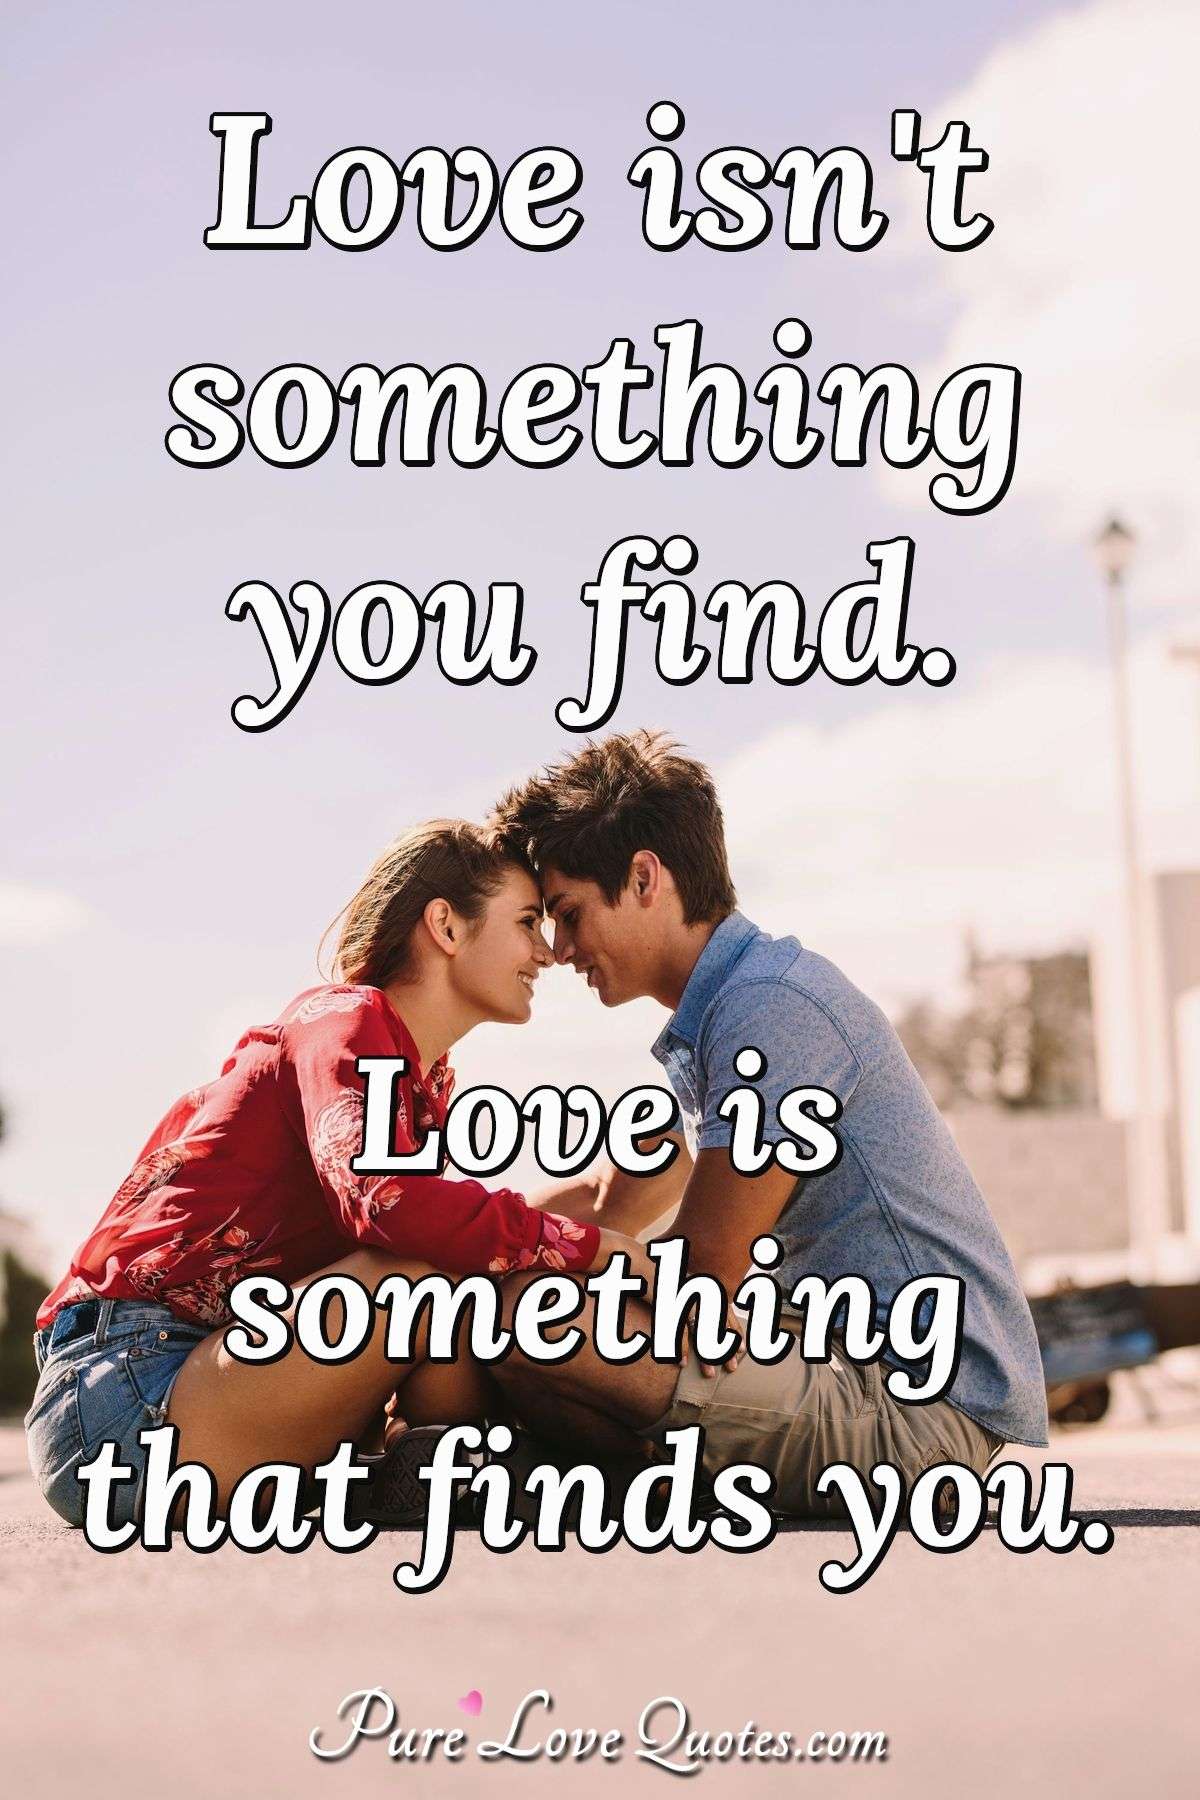 Love isn't something you find. Love is something that finds you. - Anonymous